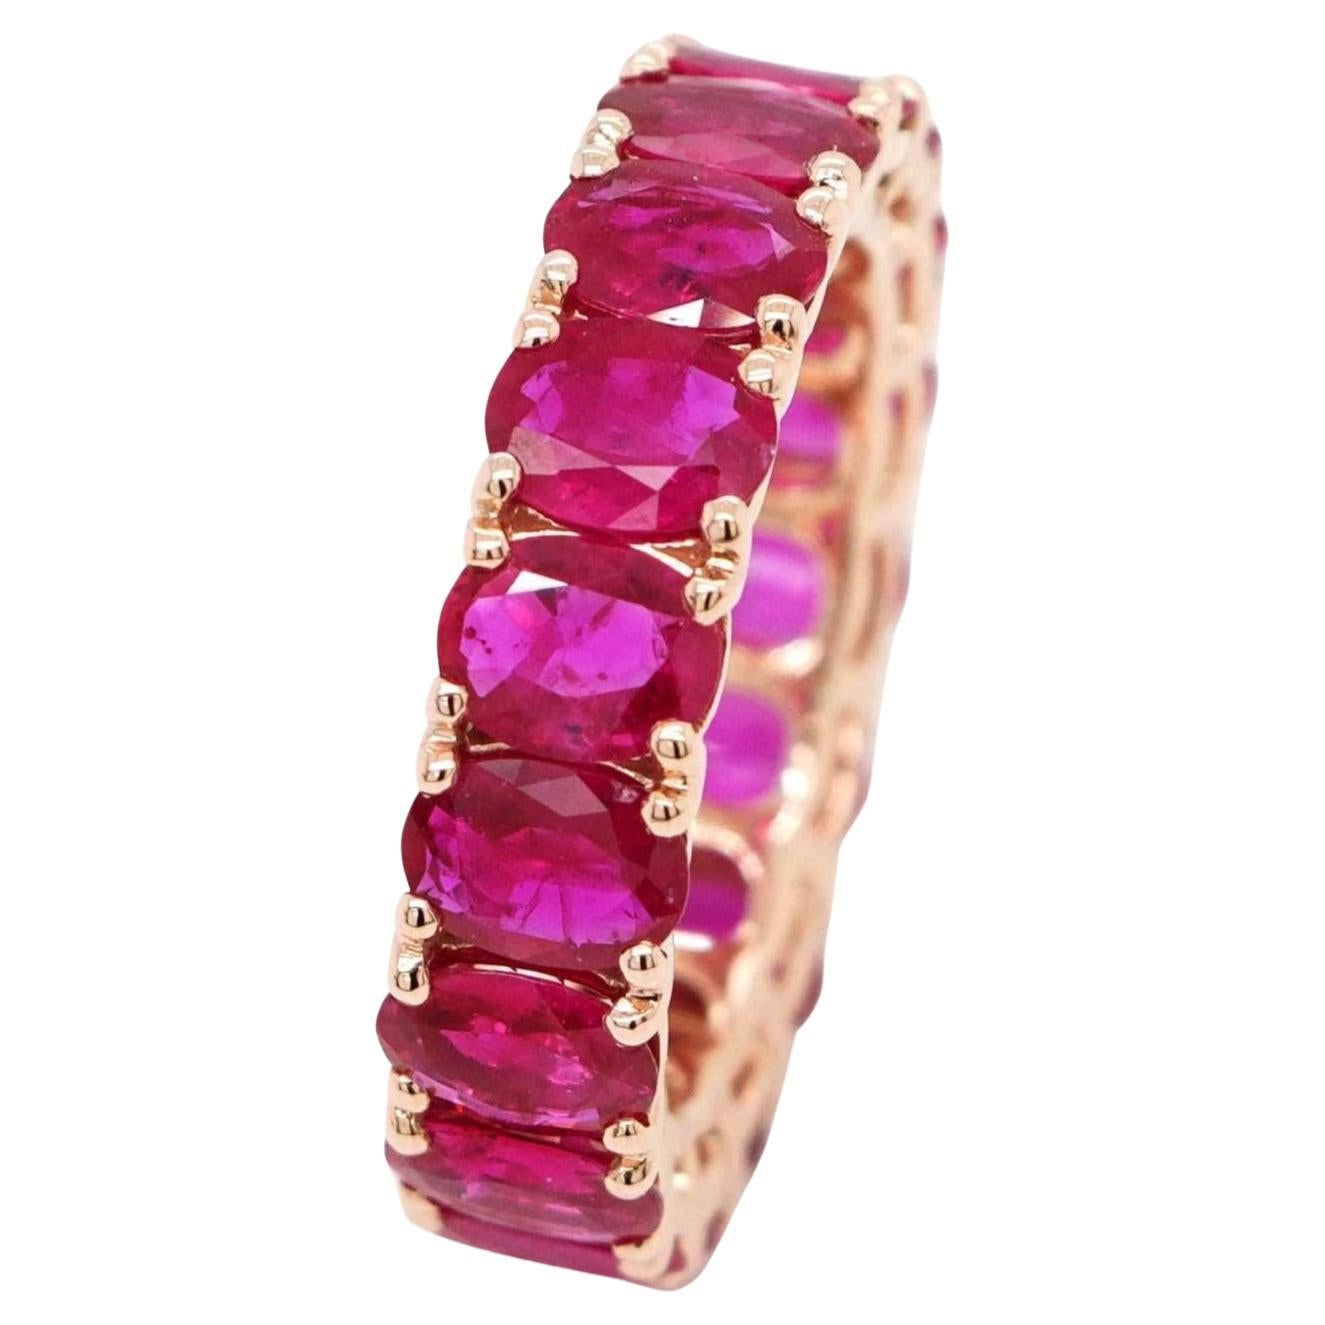 BENJAMIN FINE JEWELRY 5.24 cts Oval Ruby 18K Eternity Band Ring For Sale